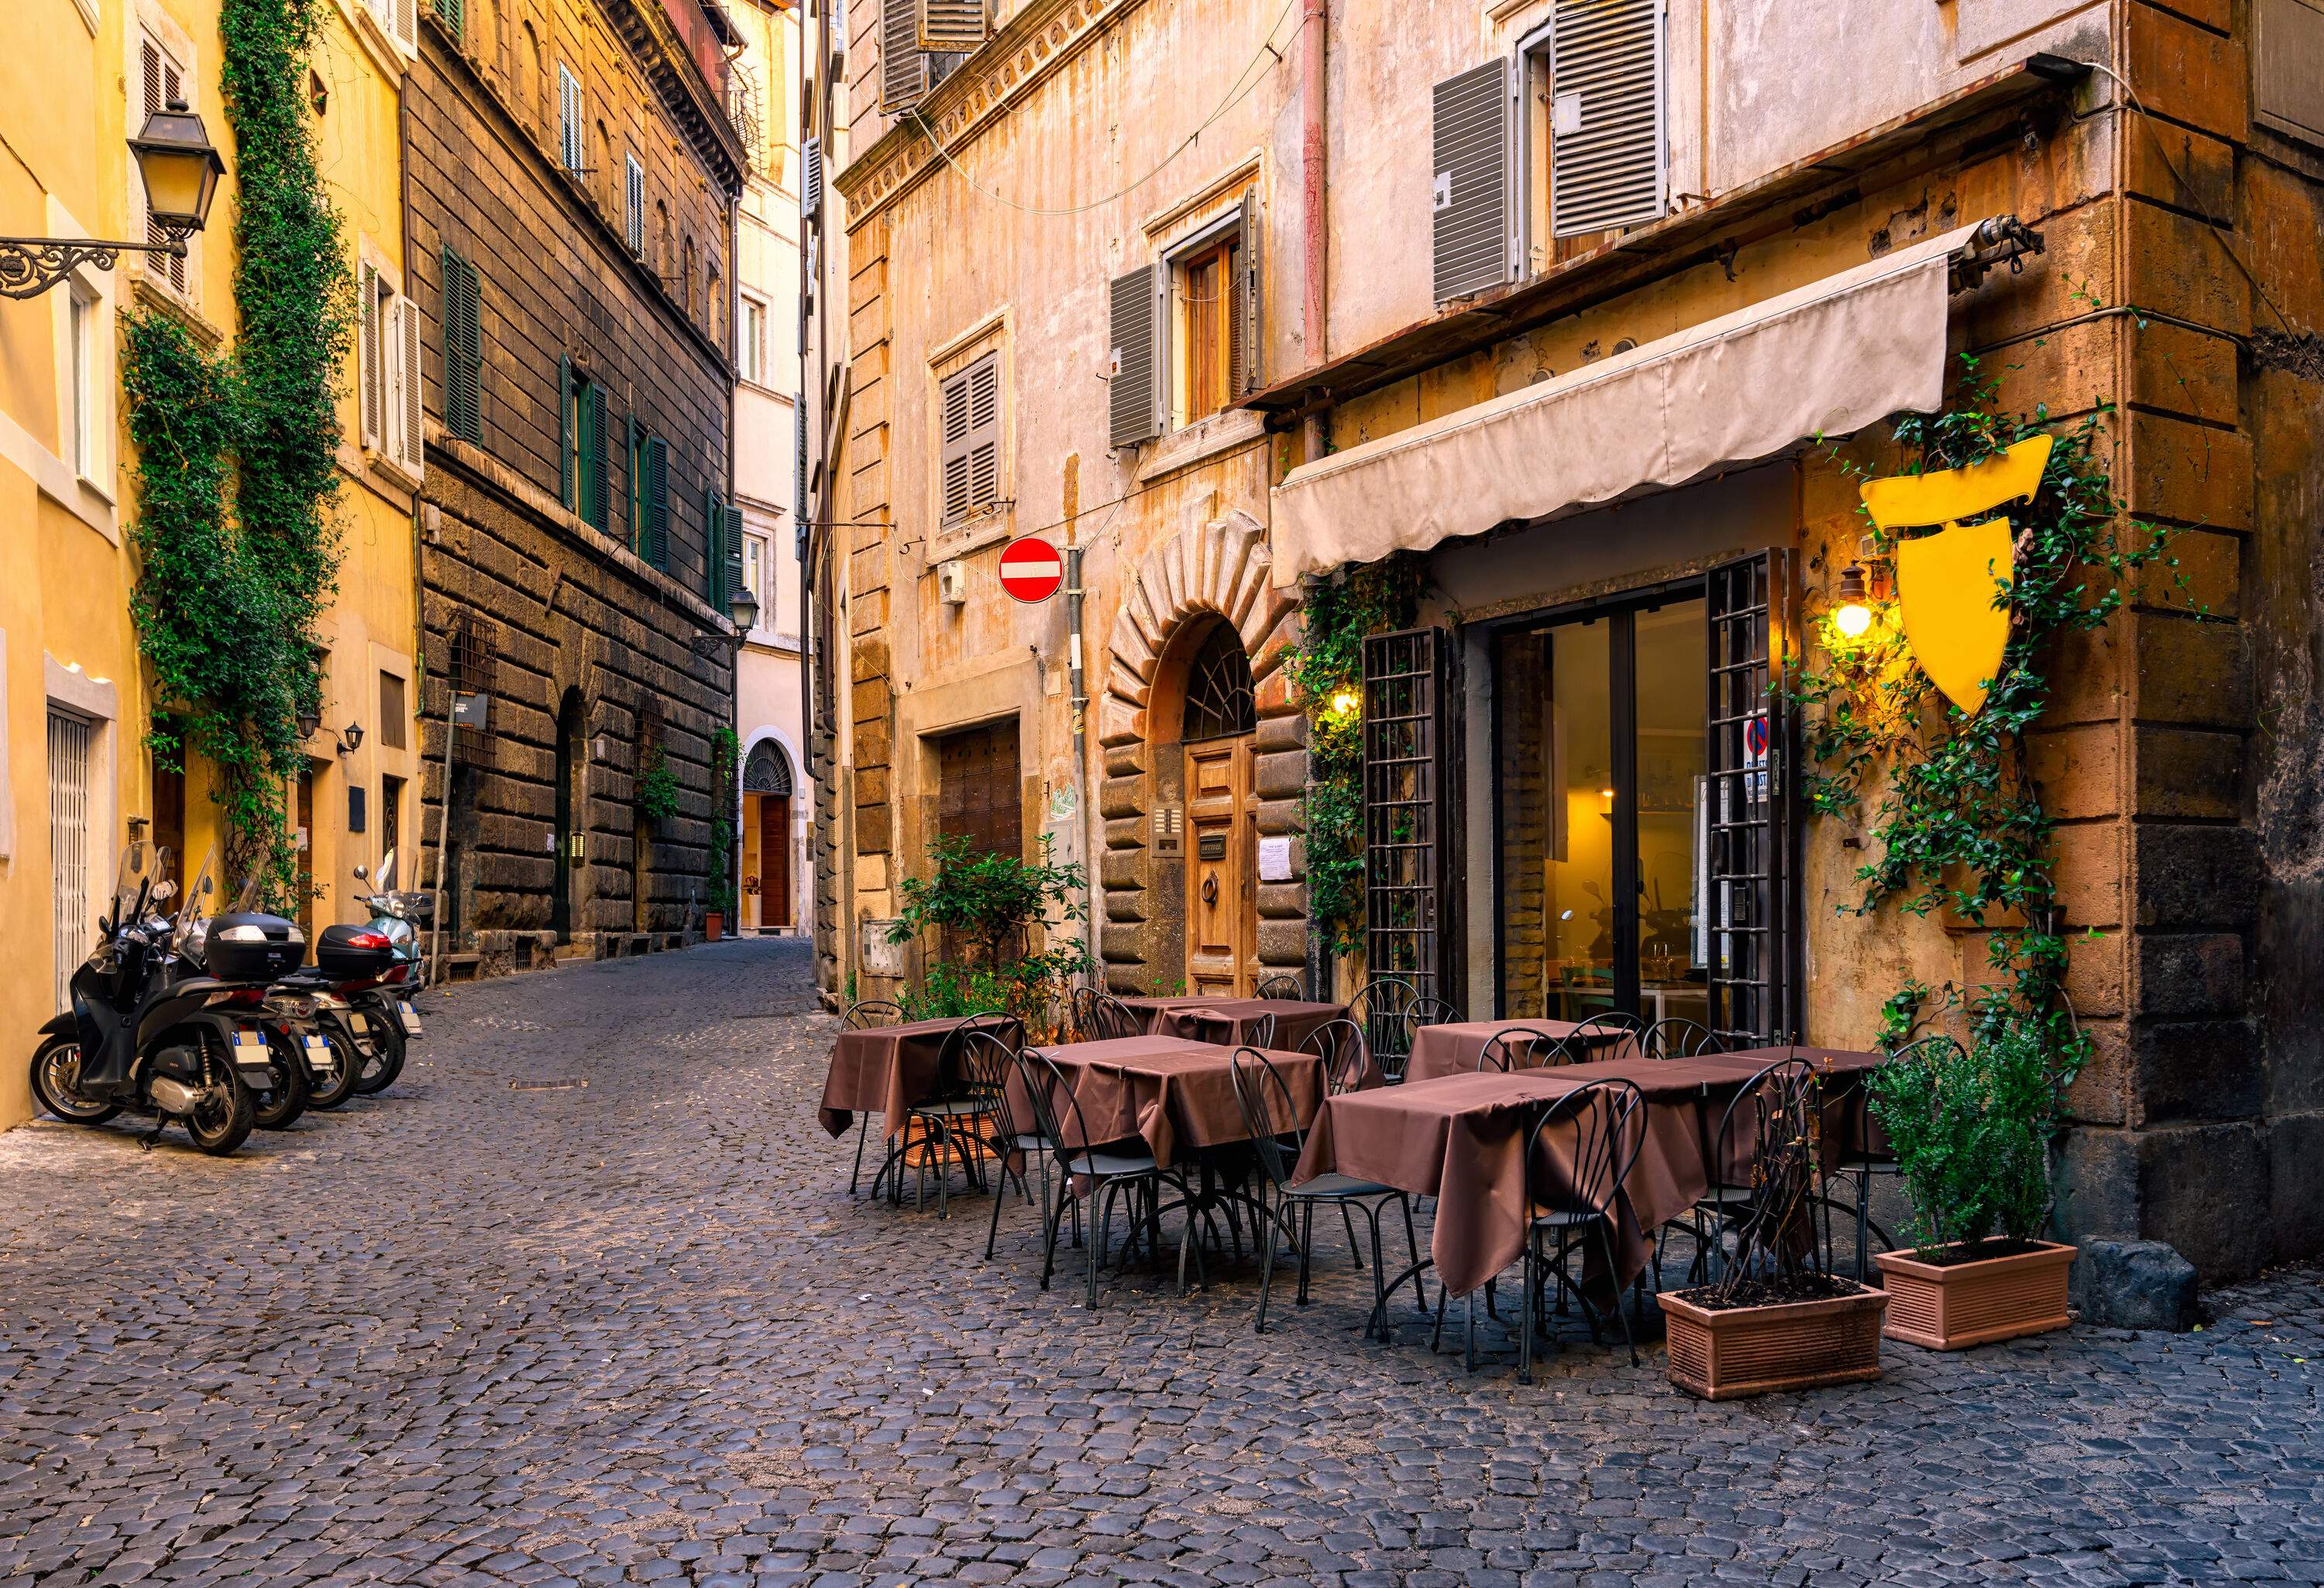 A cosy ambiance of an old stone-paved street, rustic buildings, and charming al fresco dining areas.